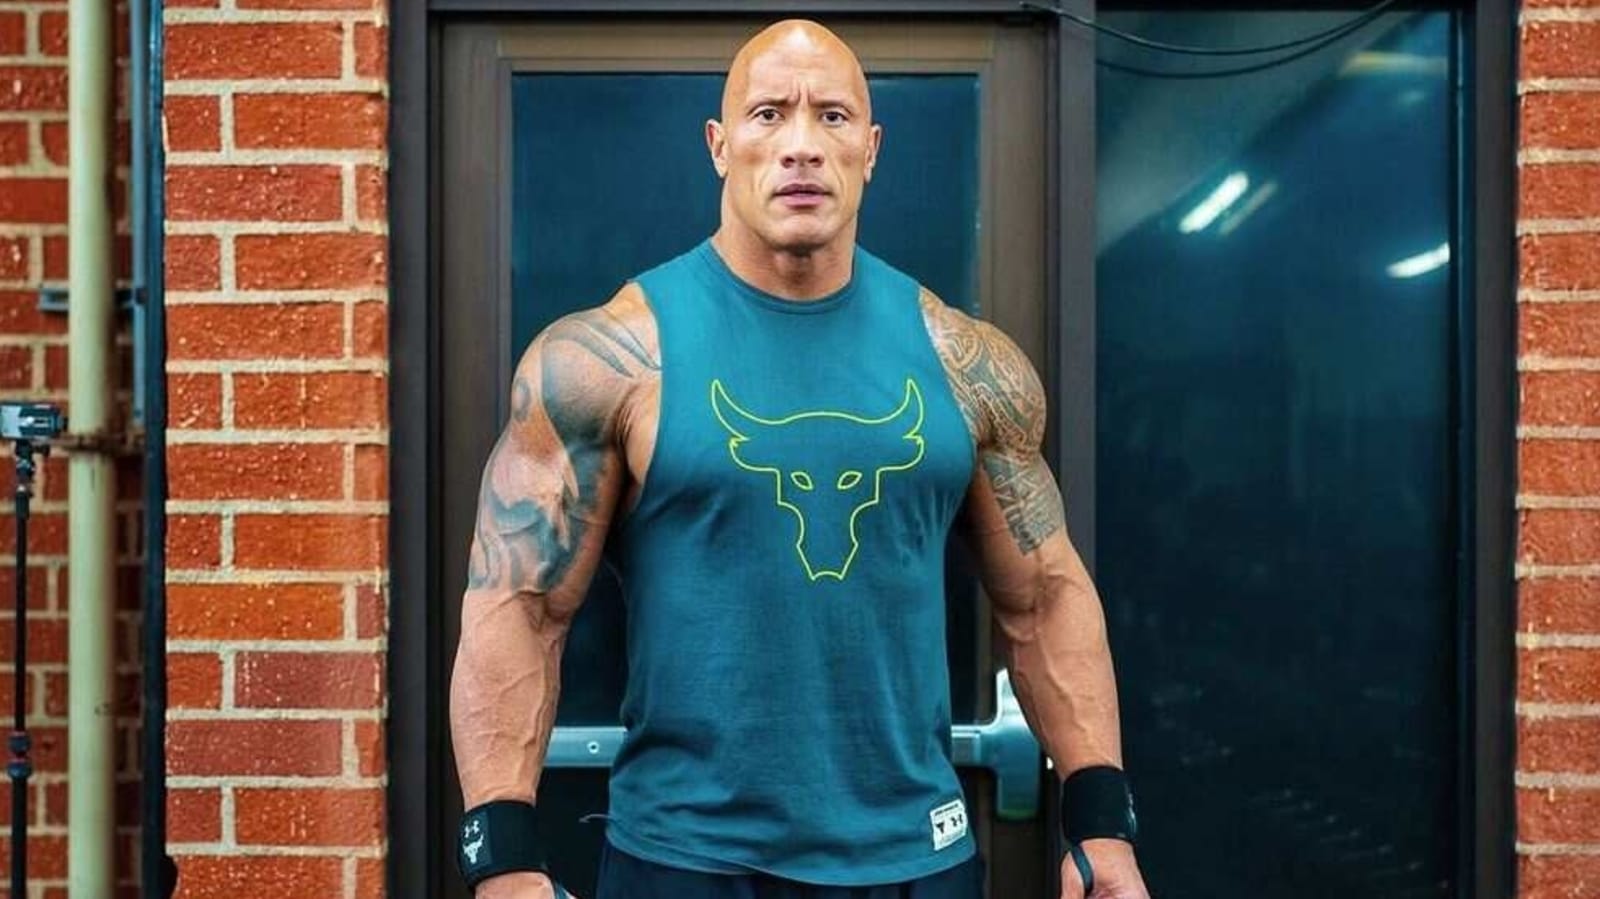 Dwayne 'The Rock' Johnson channels Covid-19 lessons into new ener...